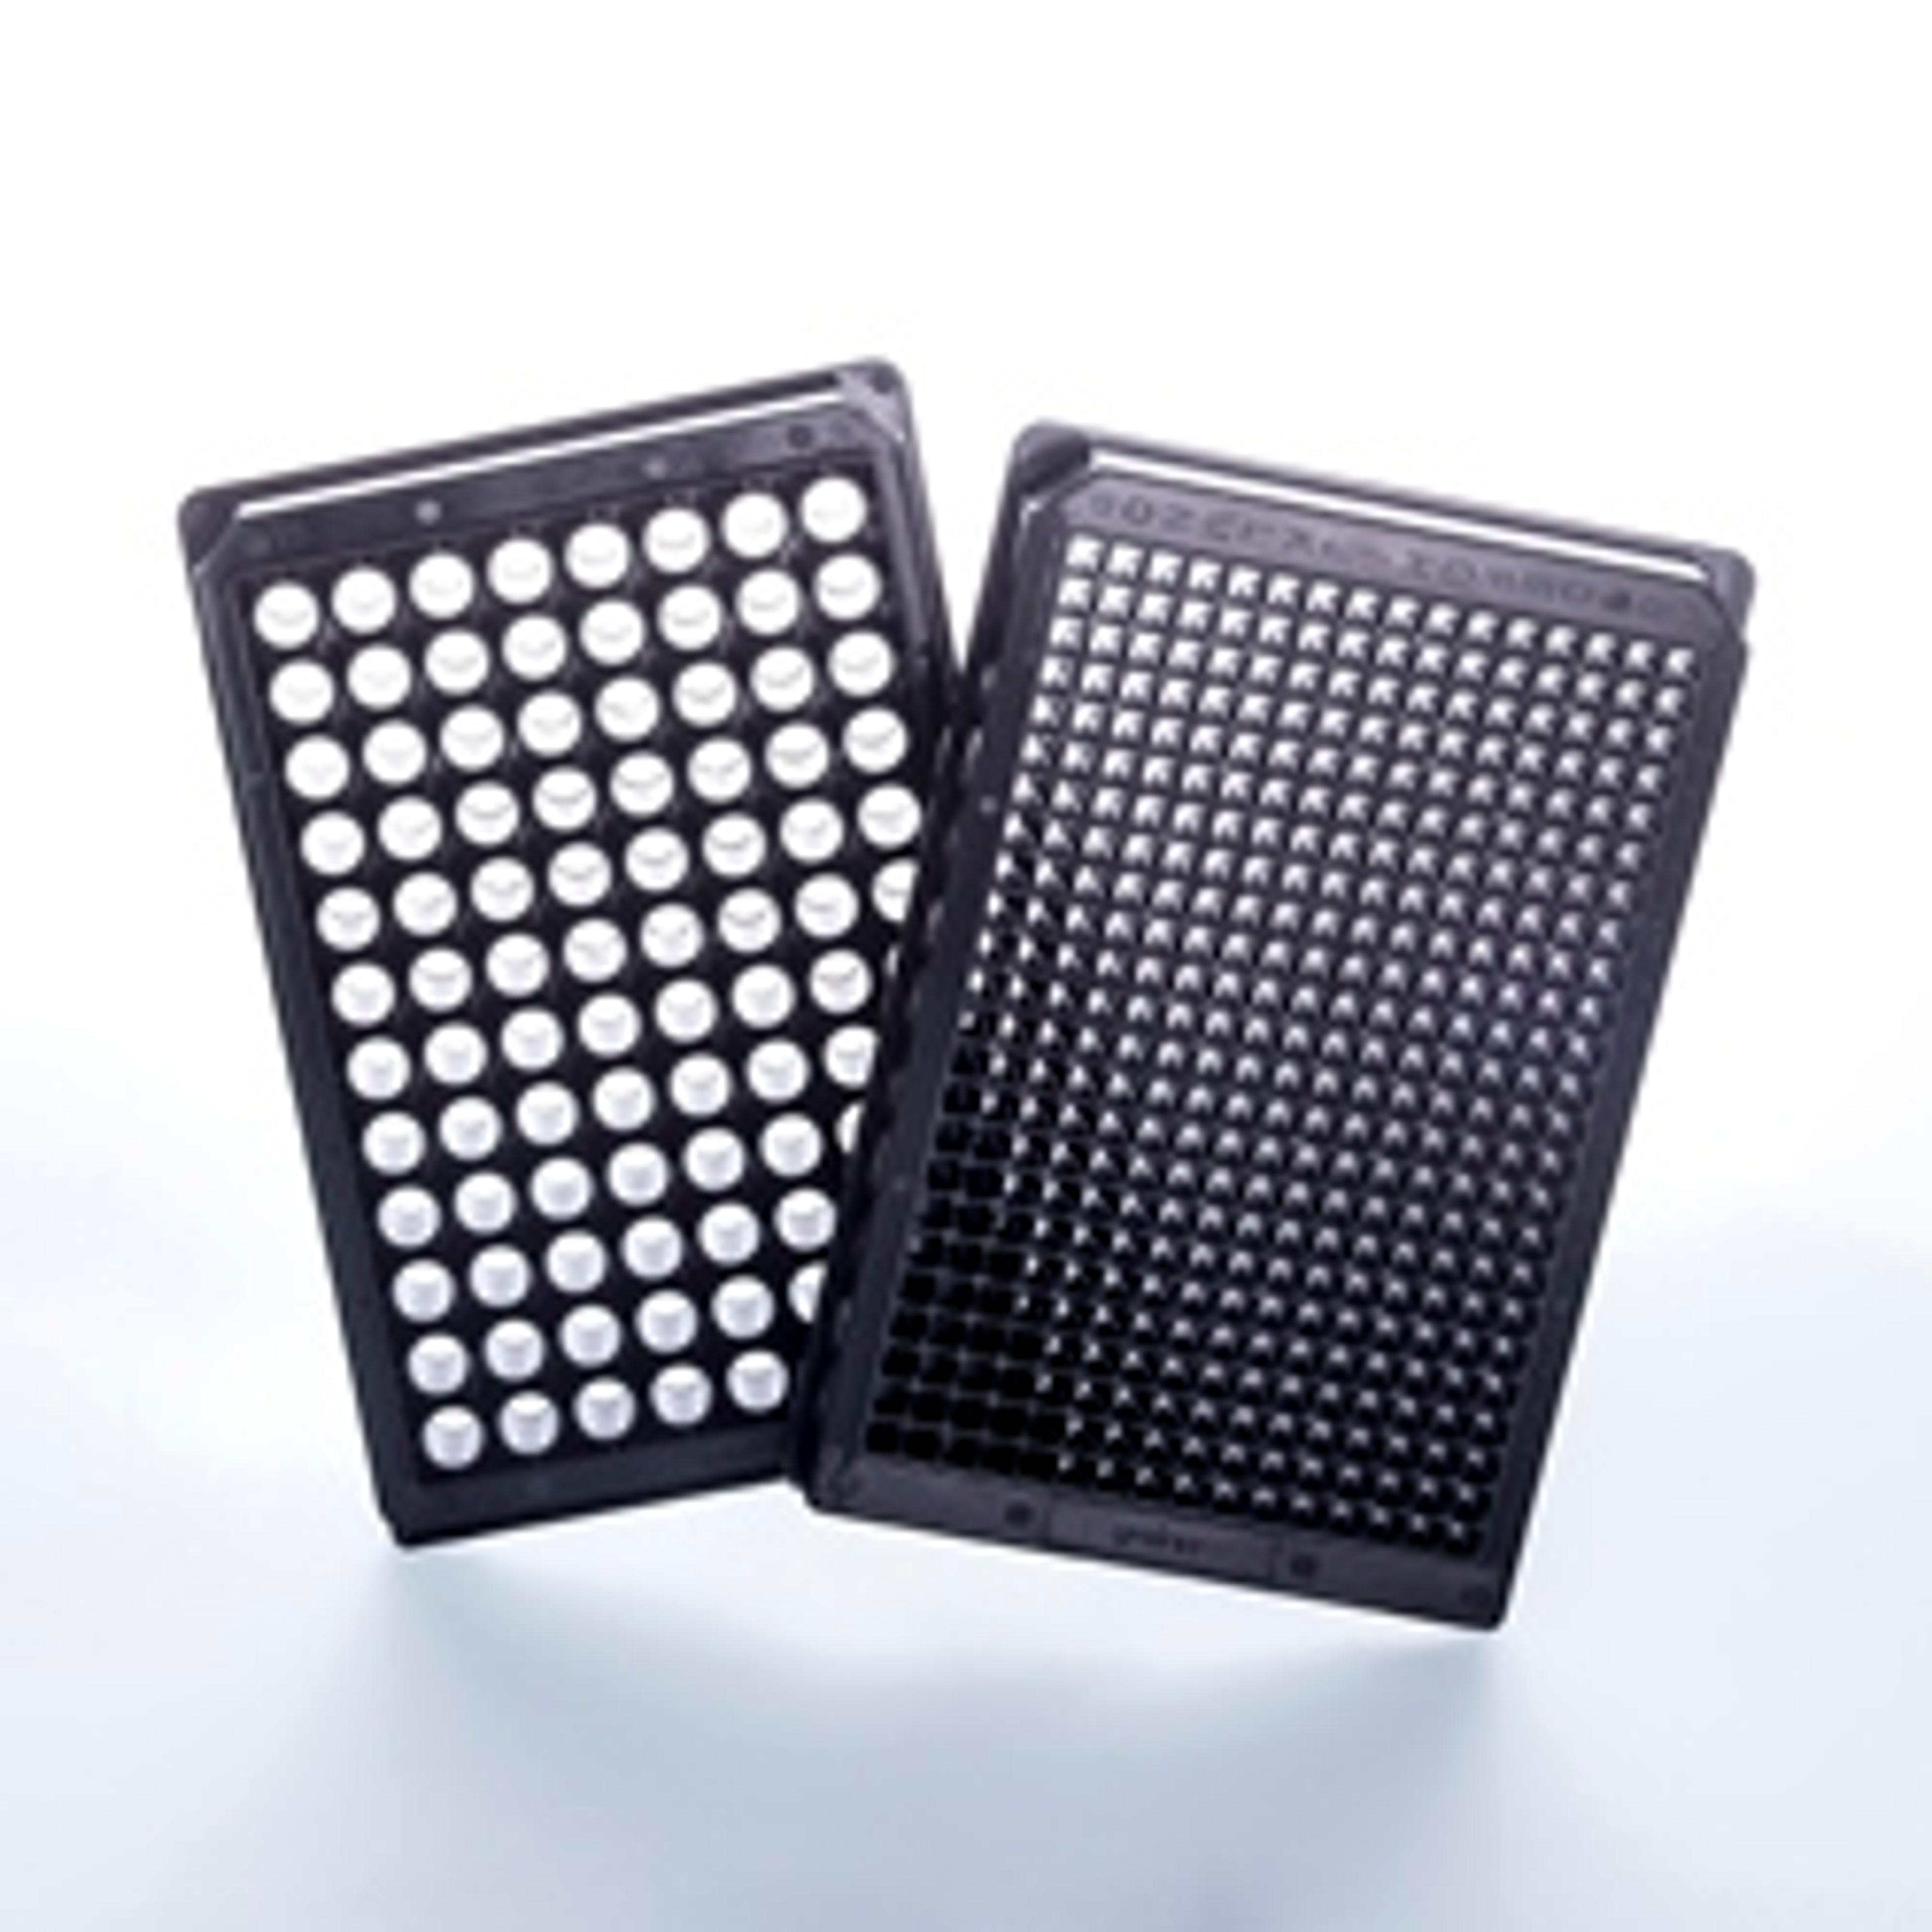 96 and 384 well CELLview Microplates